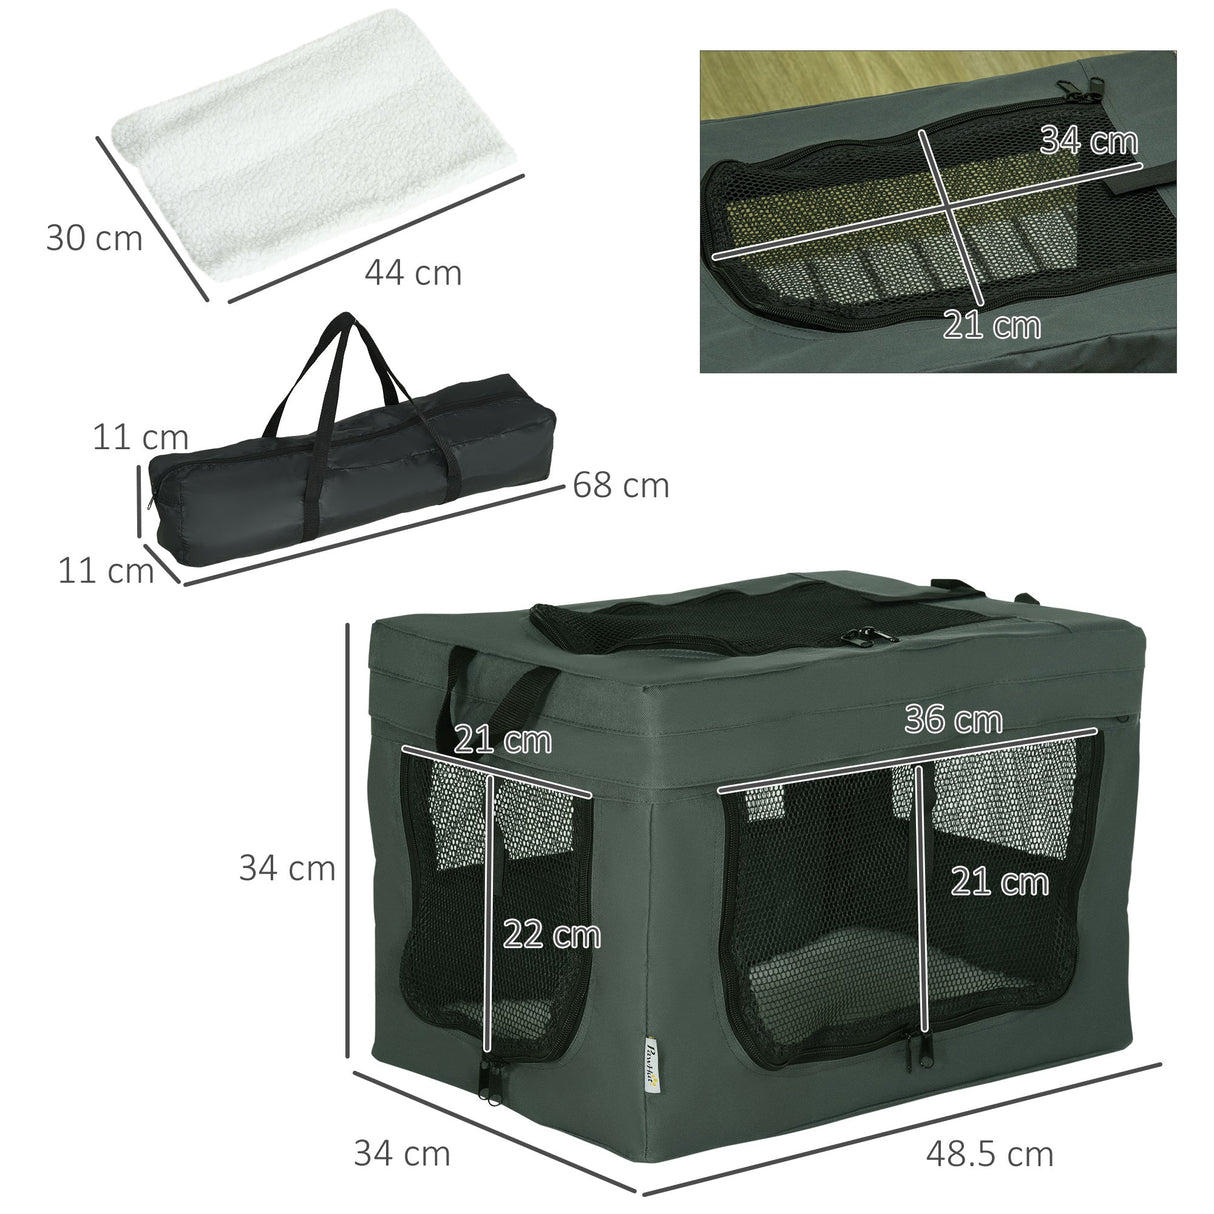 Compact 48.5cm Pet Carrier for Miniature Dogs with Cushion, PawHut, Grey